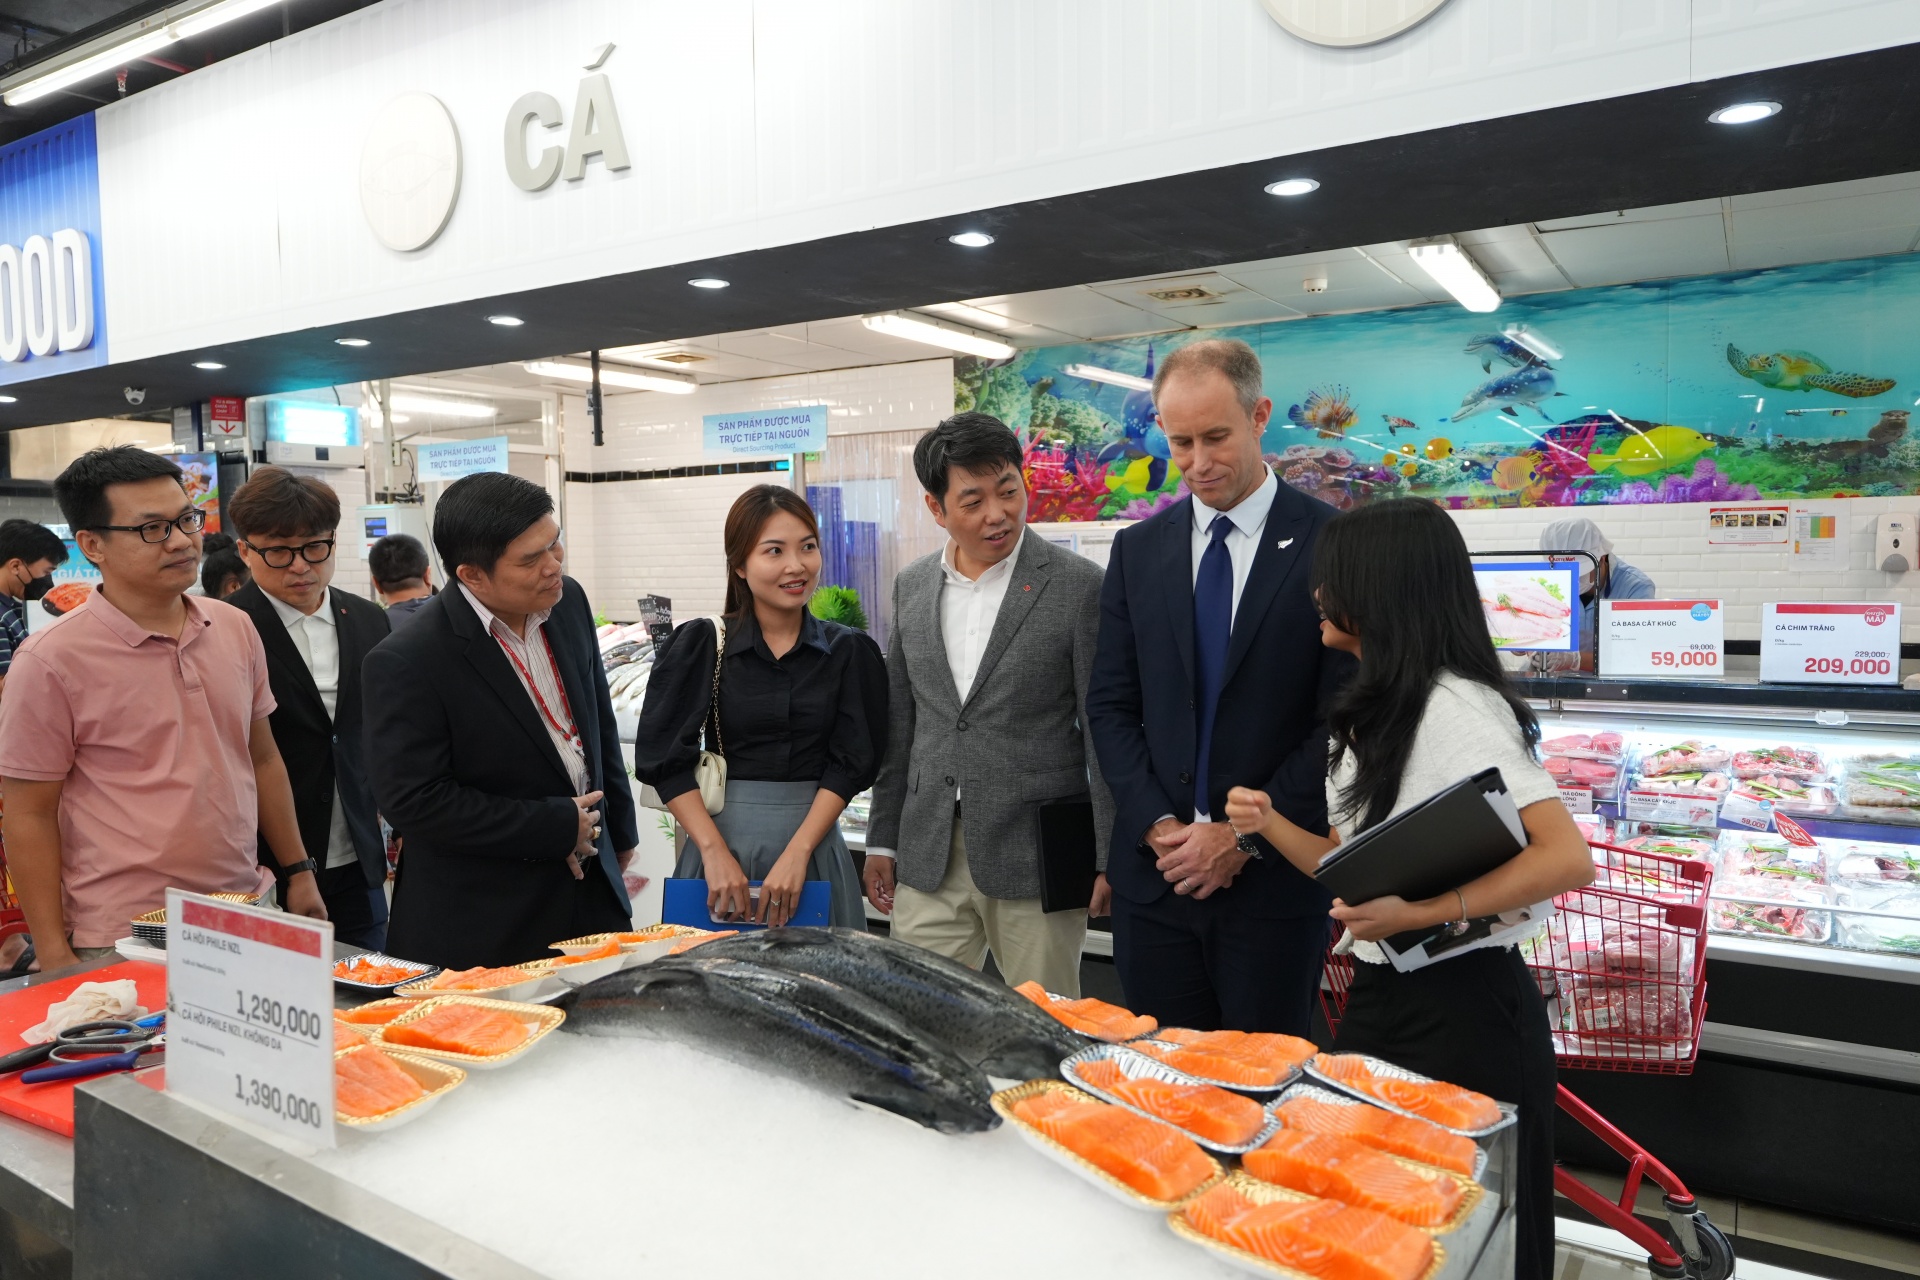 New Zealand Trade and Enterprise partners with major retailers to bring premium products to Vietnam